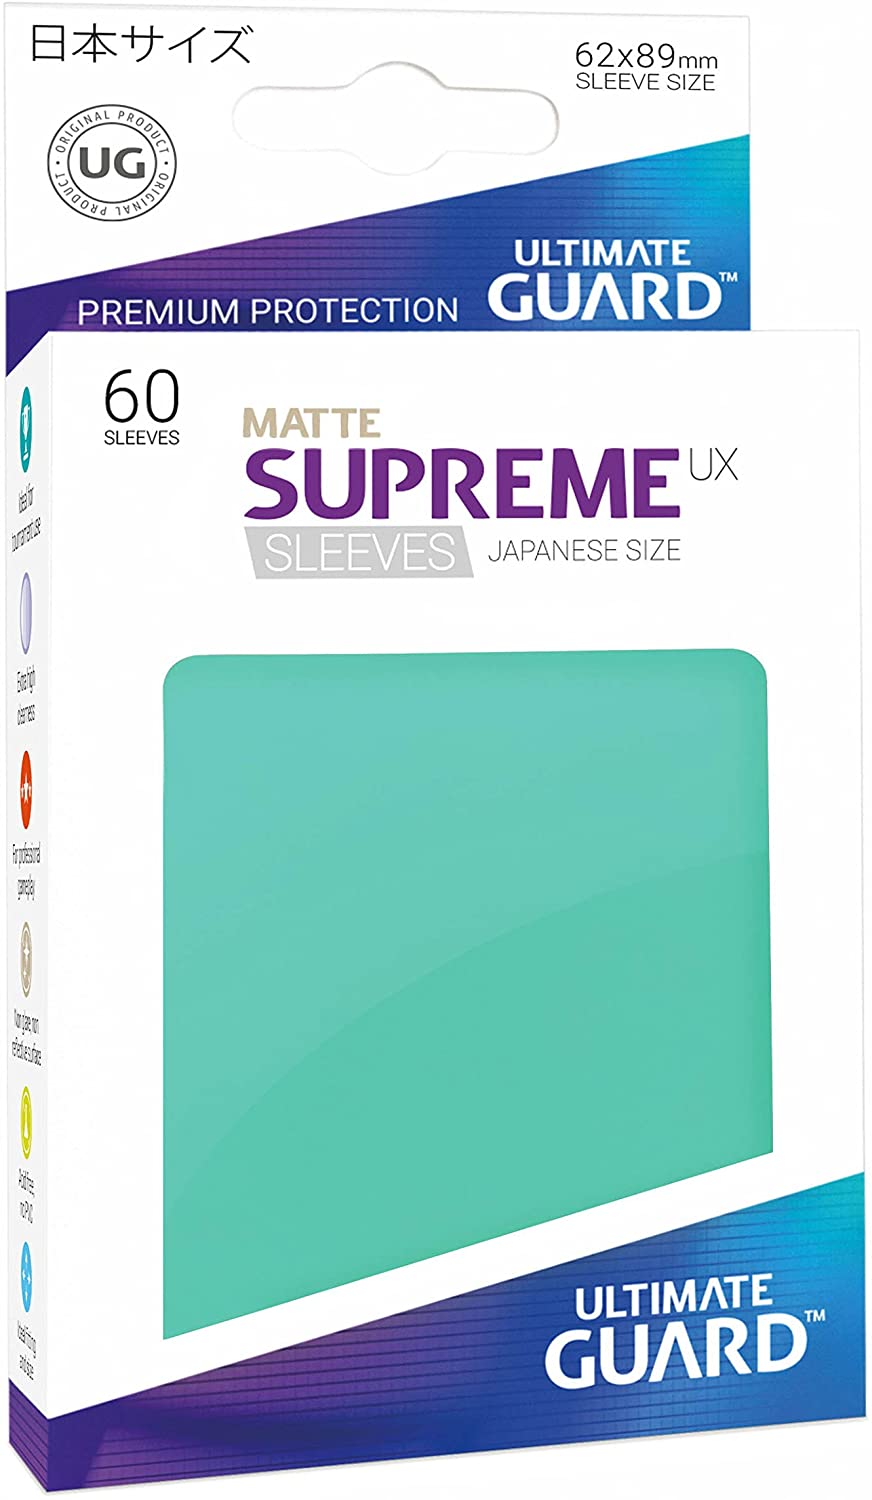 Ultimate Guard - Supreme UX Japanese Size Sleeves Matte Turquoise (60)